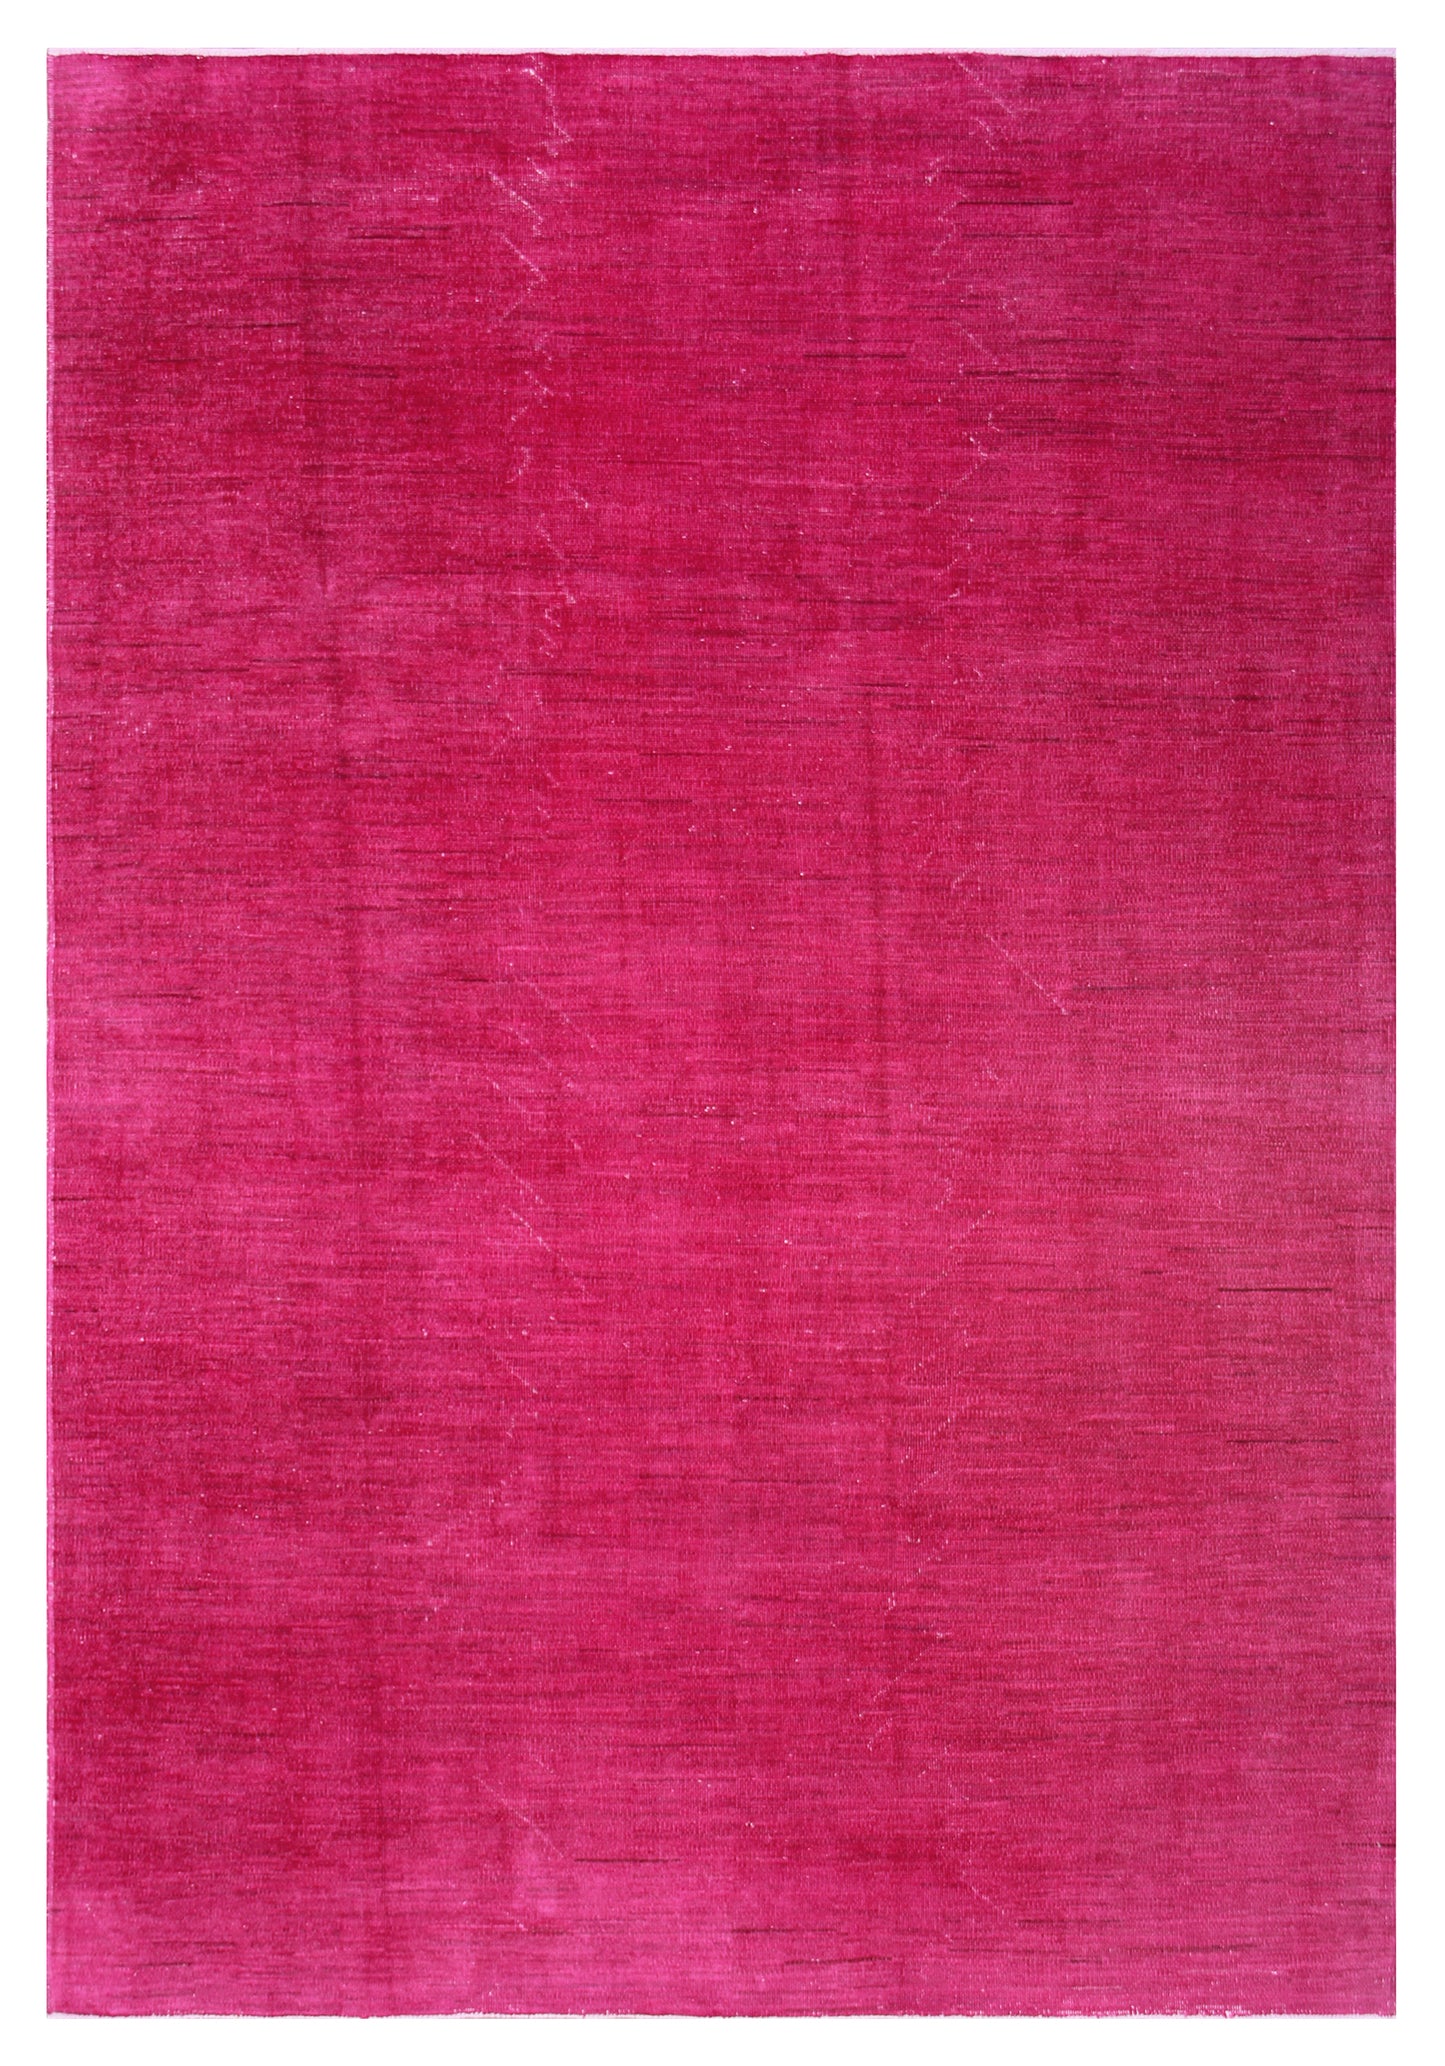 10'x6' Solid Hot Pink Hand-Knotted Ariana Over-dye Area Rug